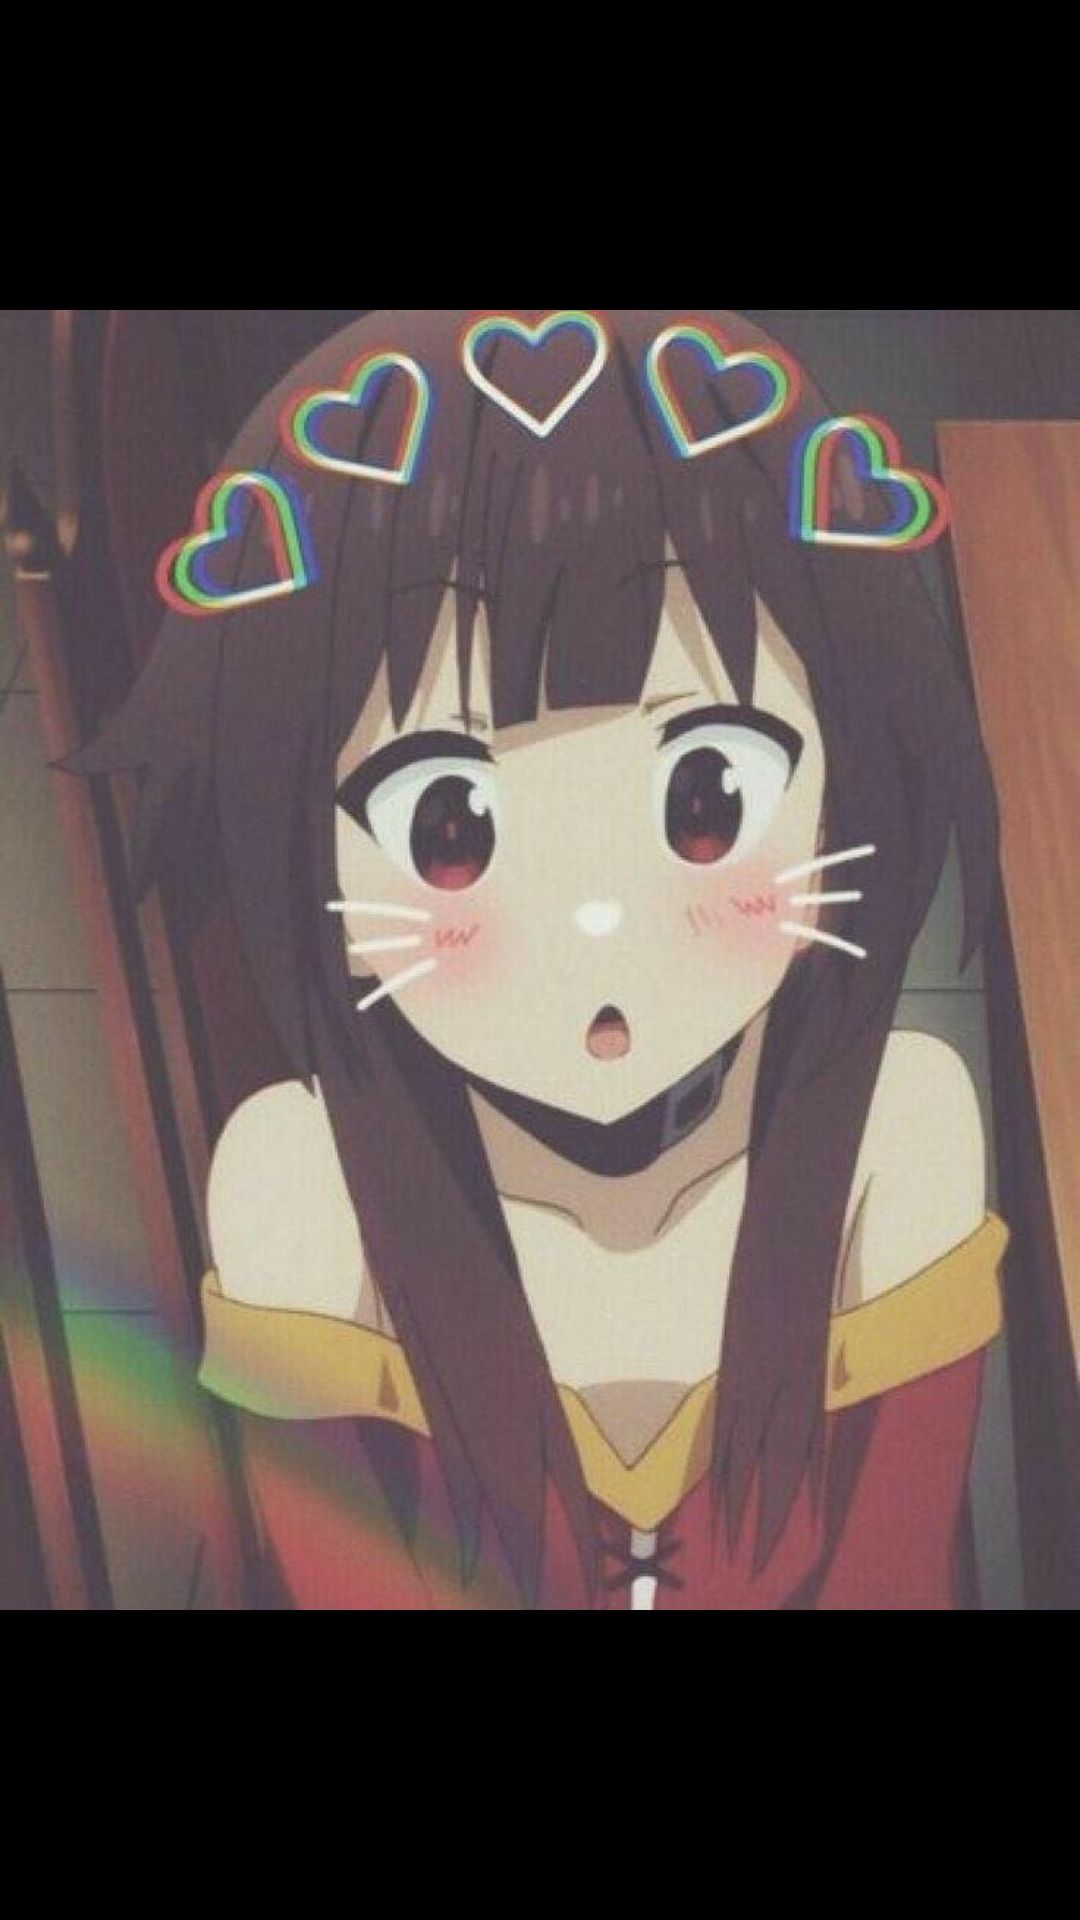 Megumin with a filter